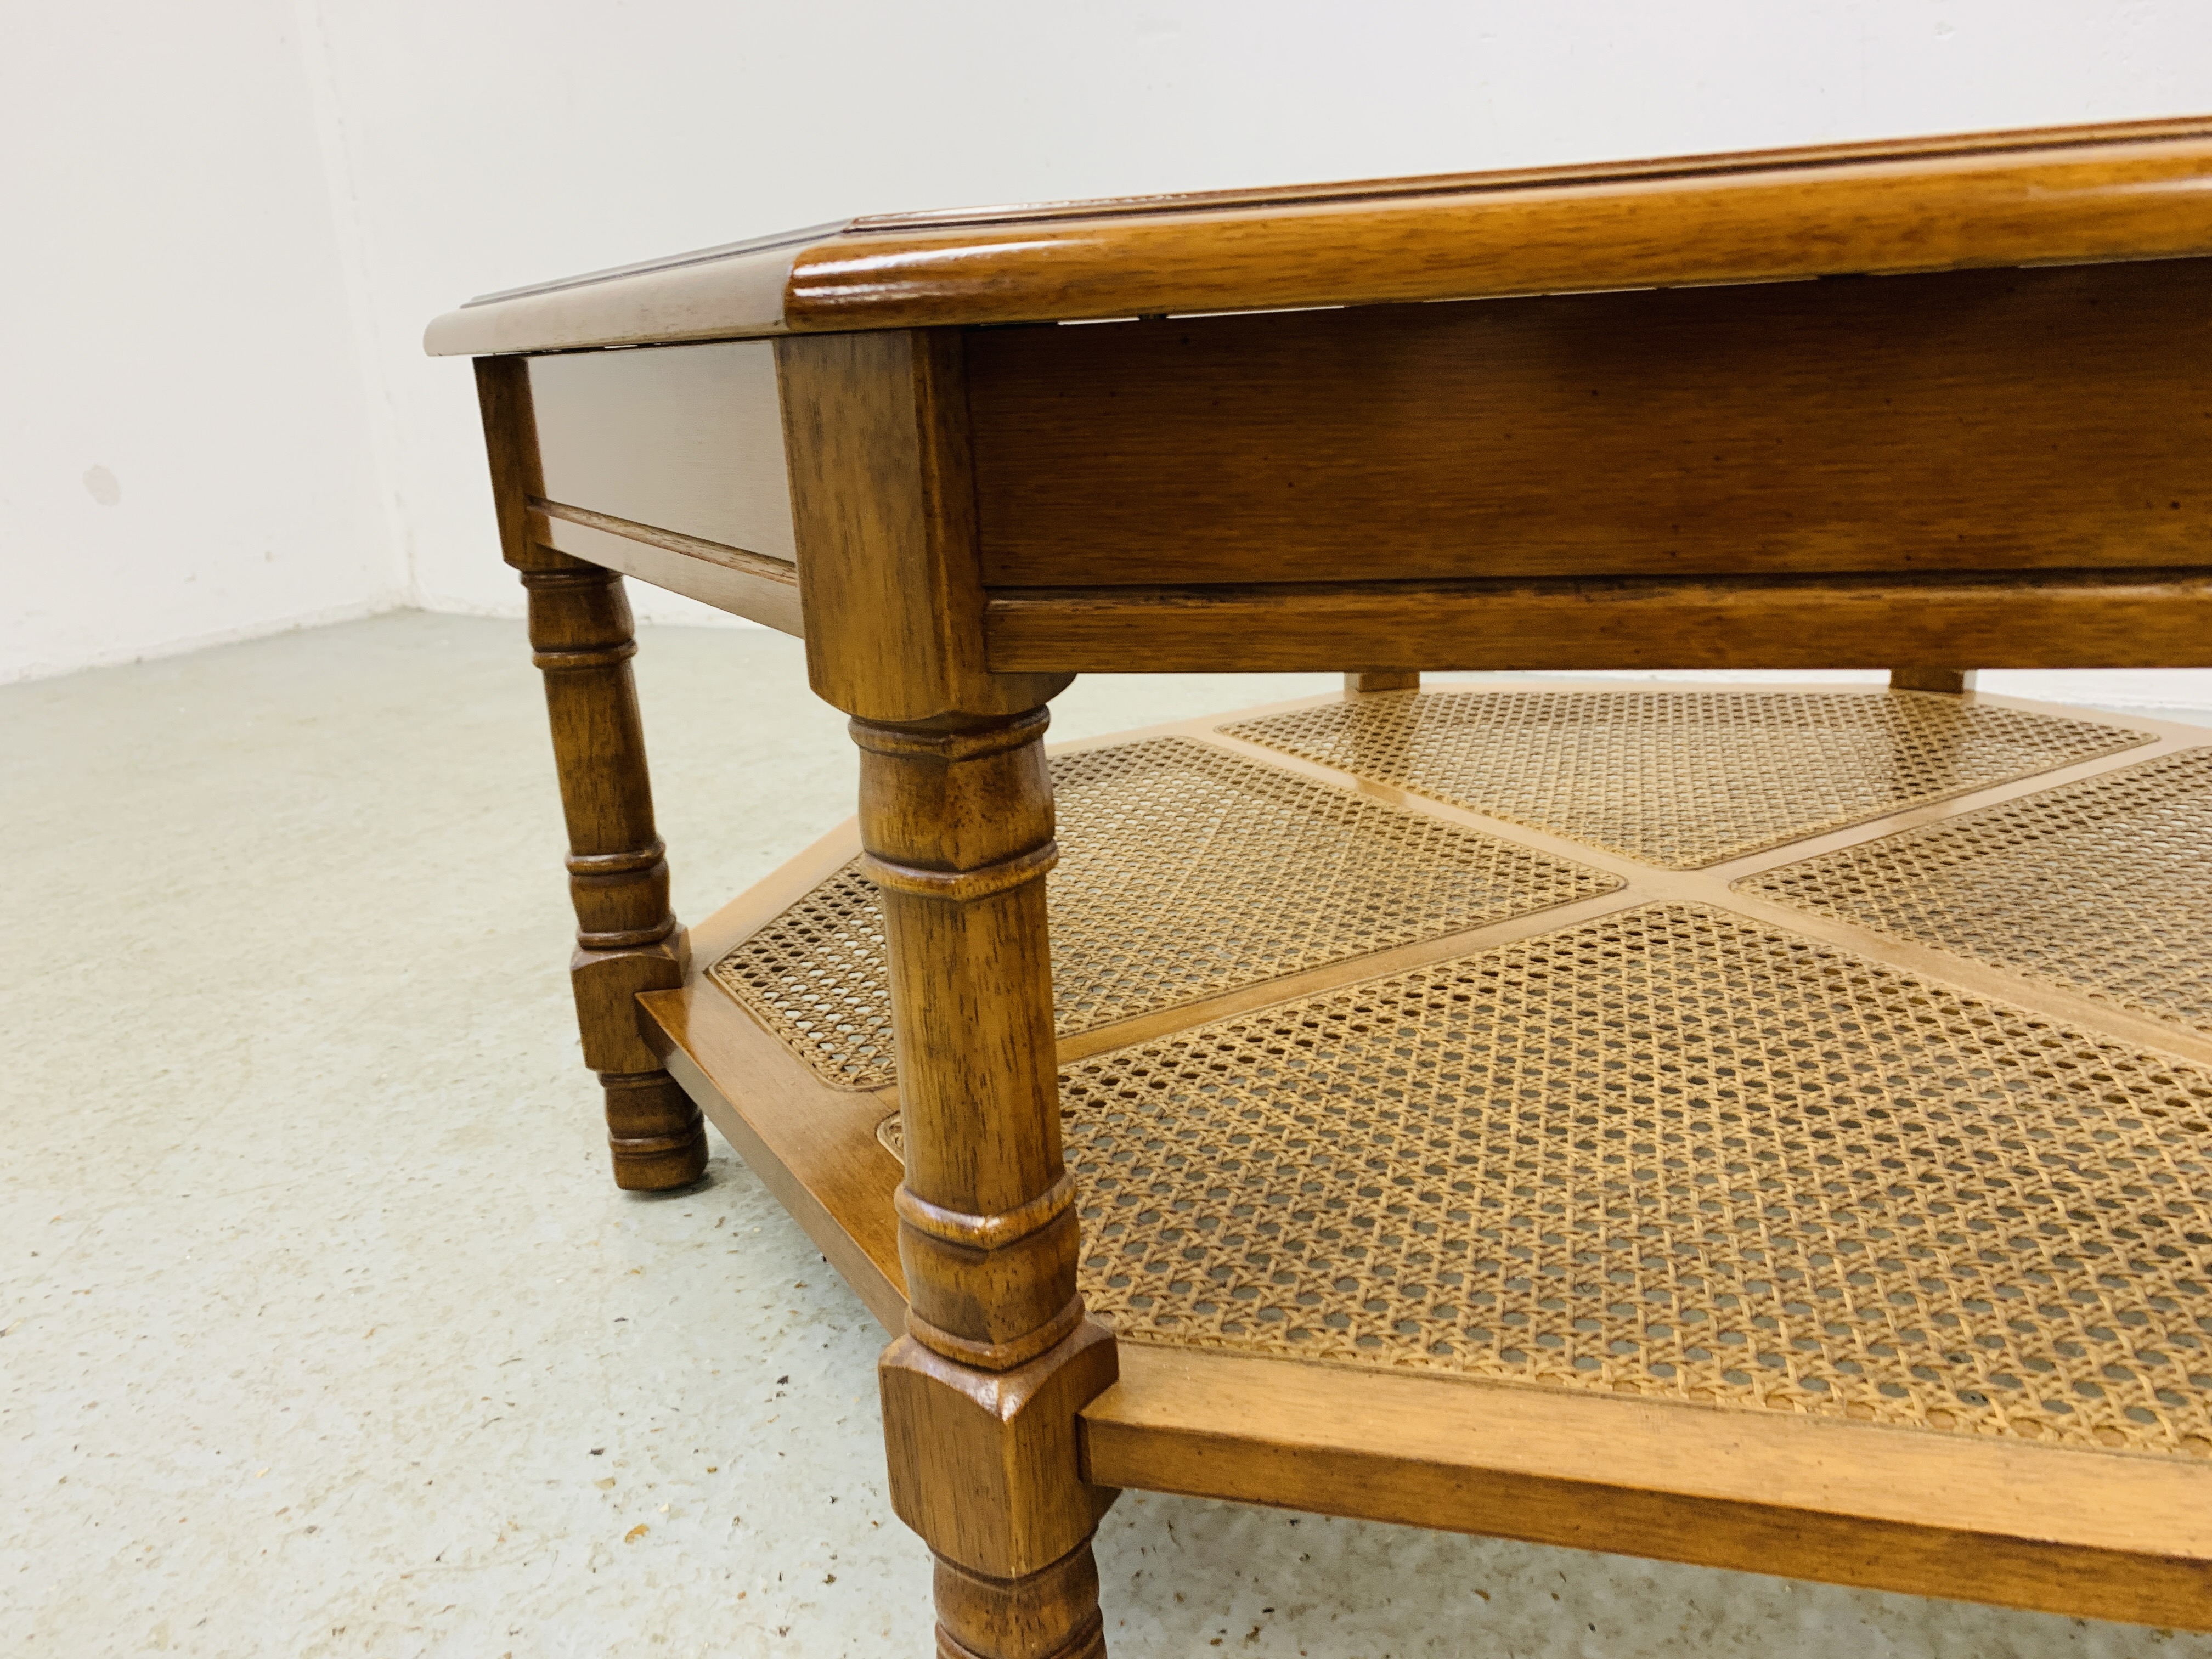 MODERN OCTAGON GLAZED COFFEE TABLE WITH RATTAN LOWER TIER - W 96CM. D 96CM. H 39CM. - Image 4 of 6